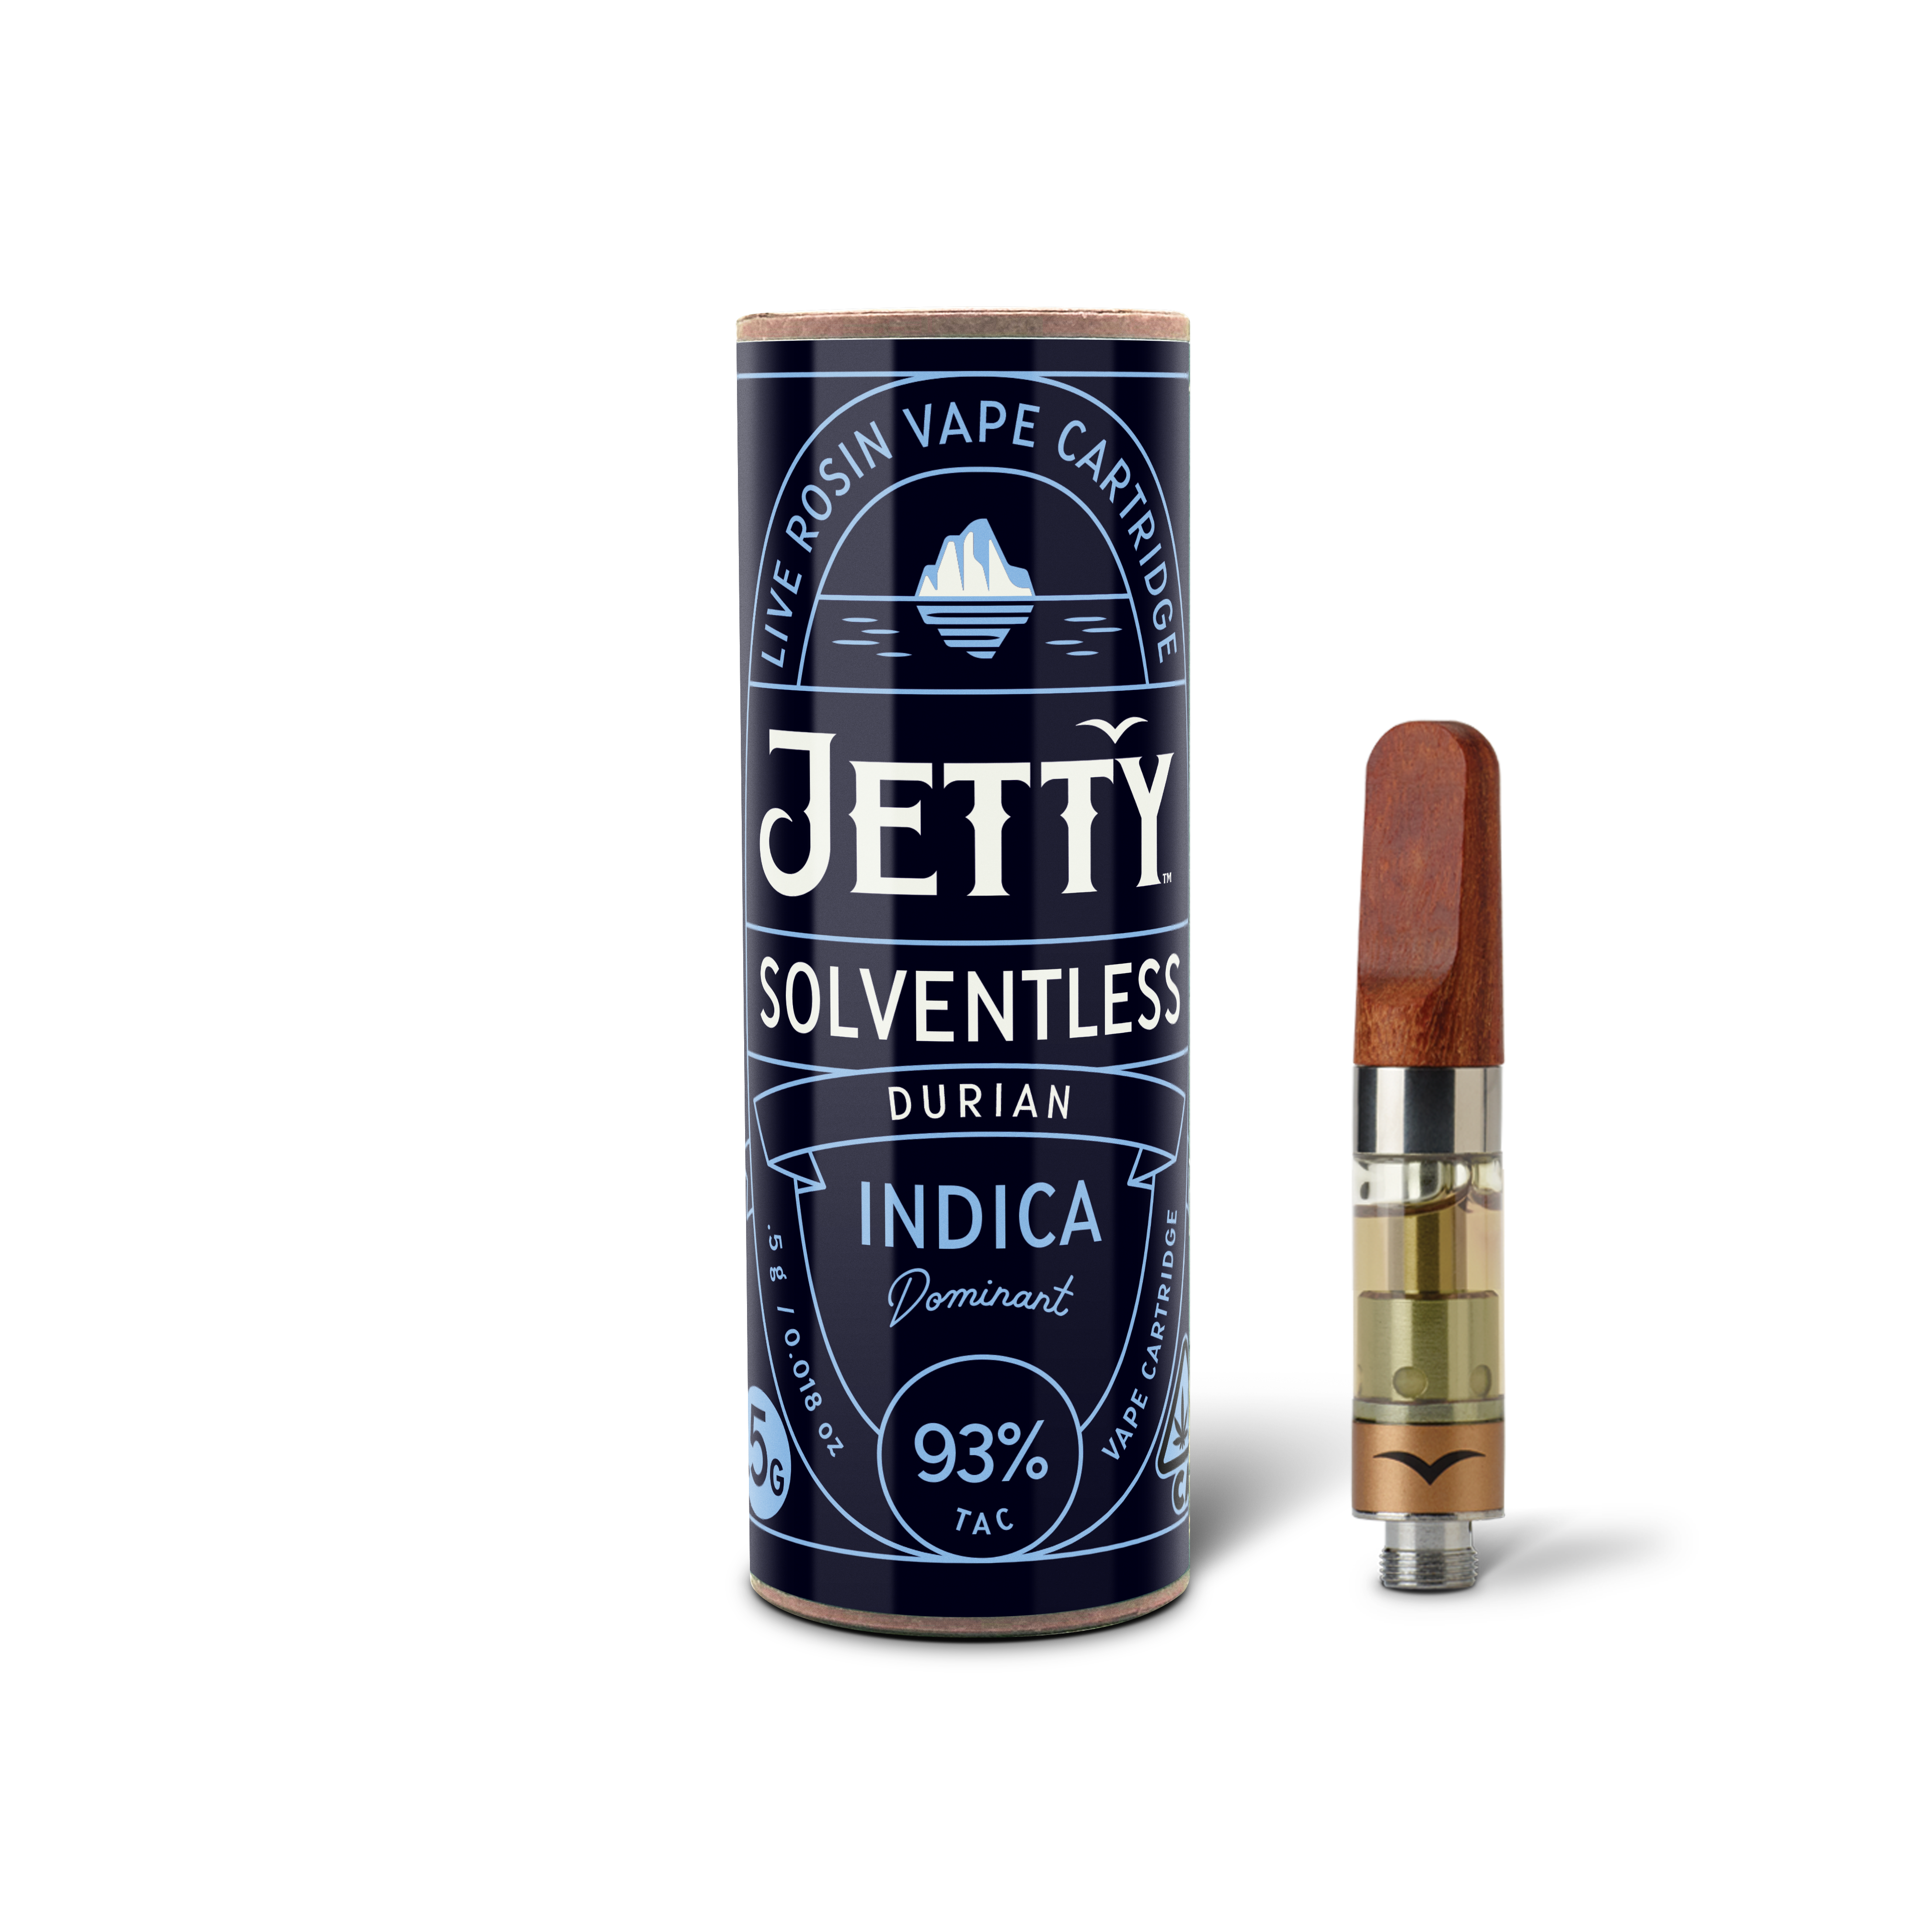 A photograph of Jetty Cartridge 0.5g Solventless Durian